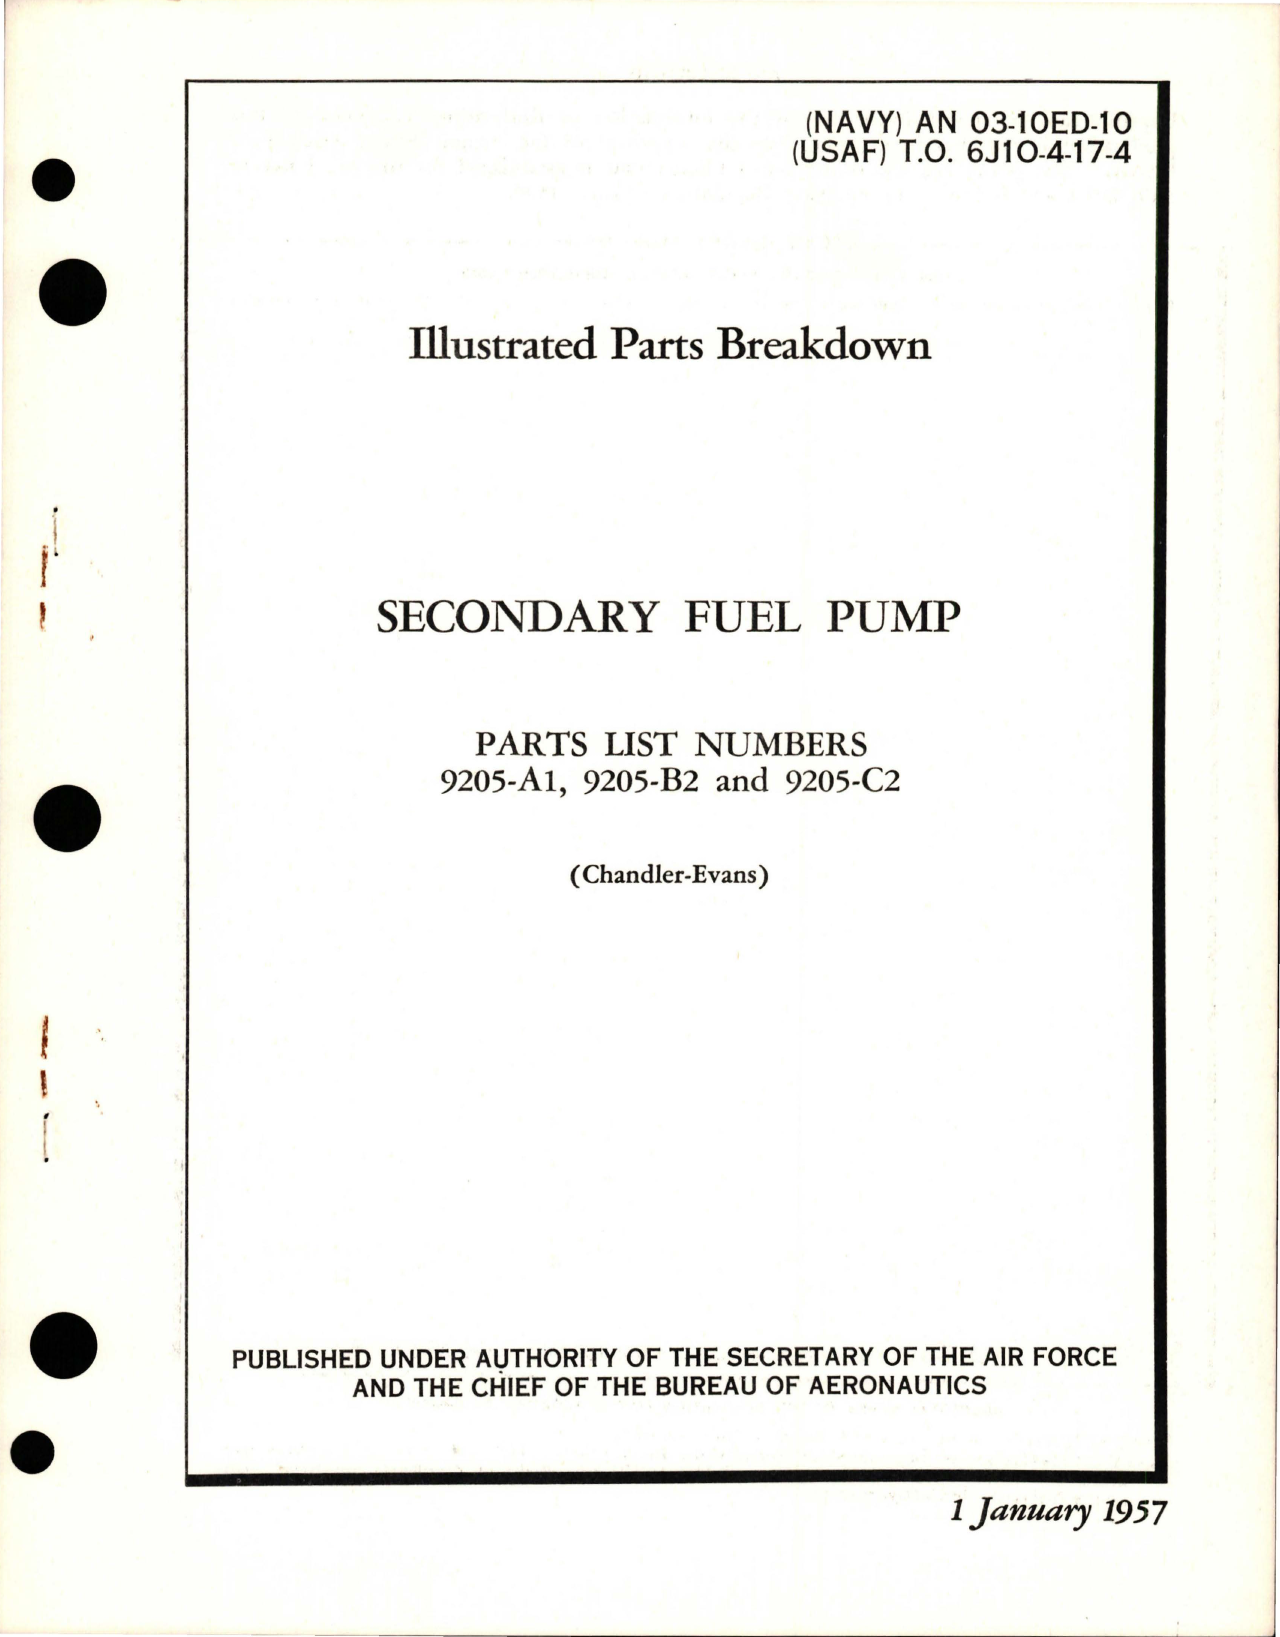 Sample page 1 from AirCorps Library document: Illustrated Parts Breakdown for Secondary Fuel Pump - Parts List 9205-A1, 9205-B2, and 9205-C2